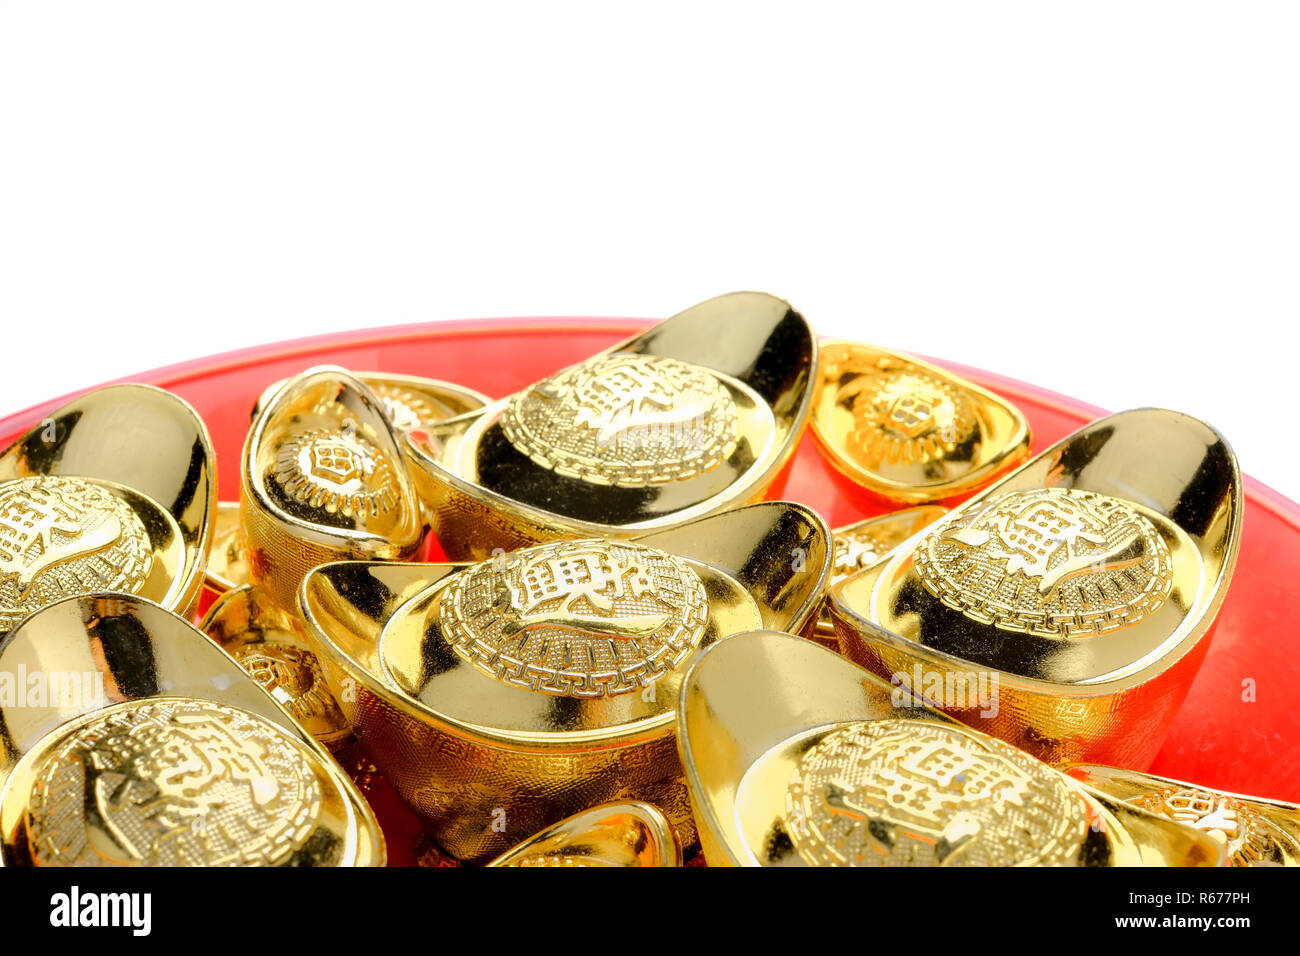 group of golden ingots on red tray isolate at white background.Chinese new year concept,leave space for adding text.Chinese Language on ingot mean 'We Stock Photo